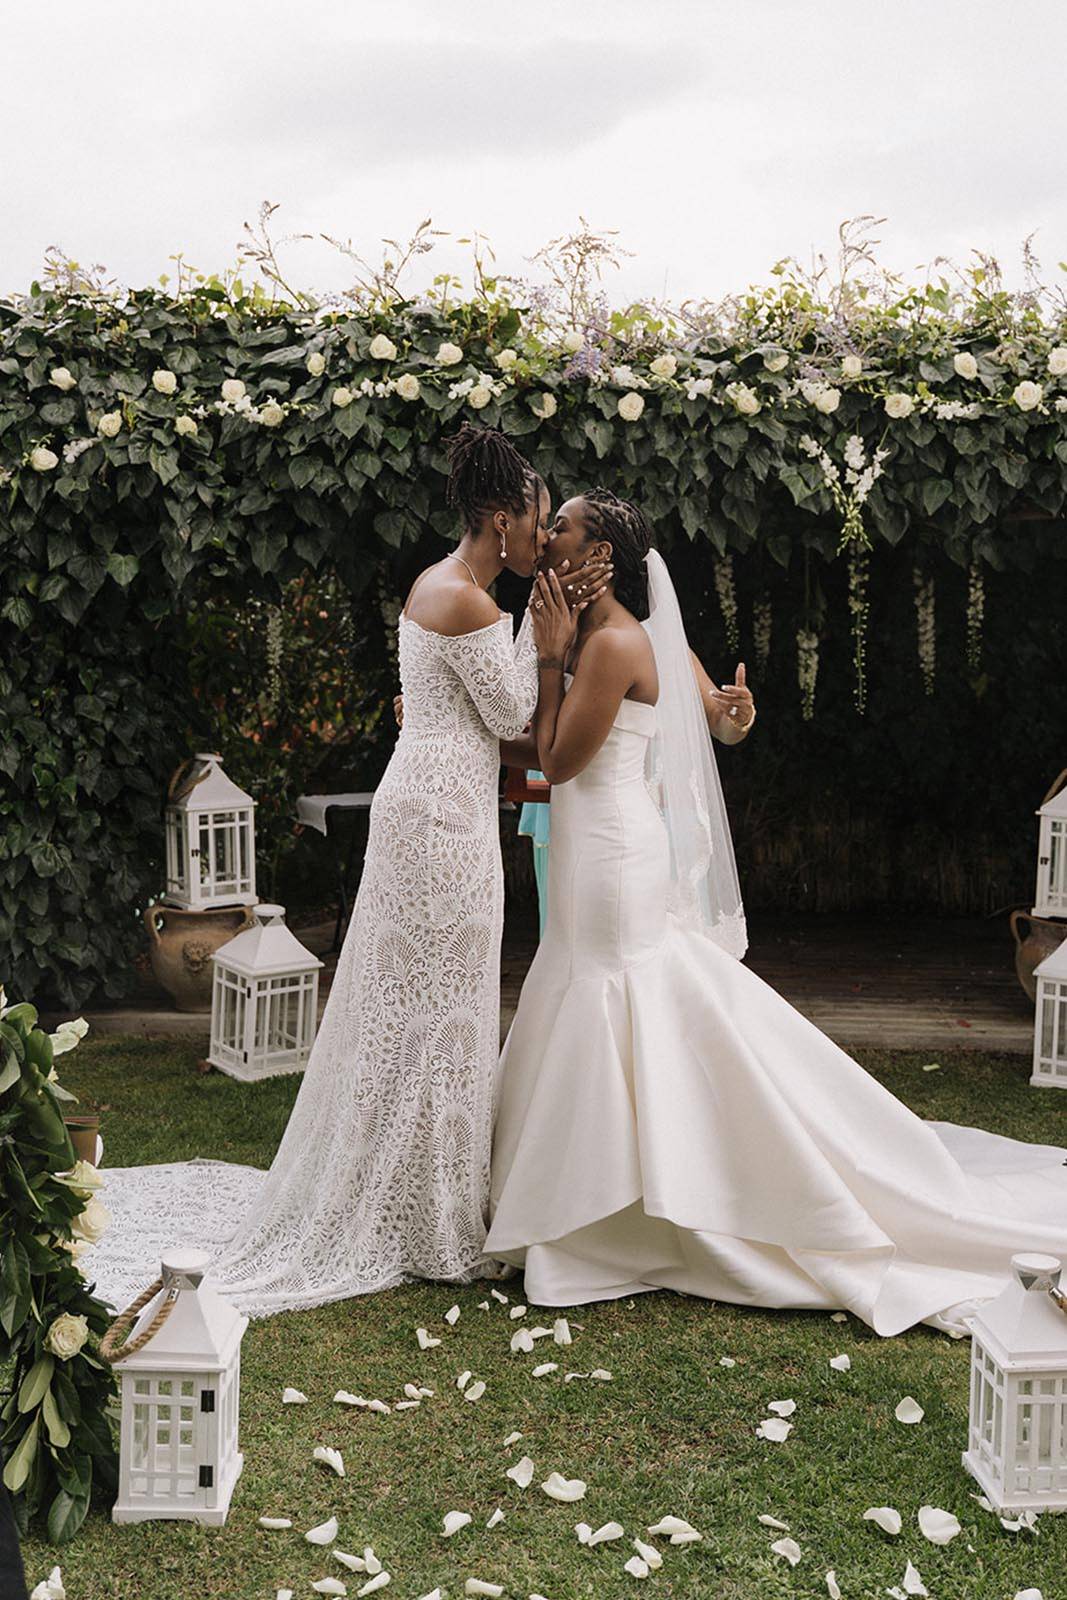 Two brides, sharing a kiss in the garden